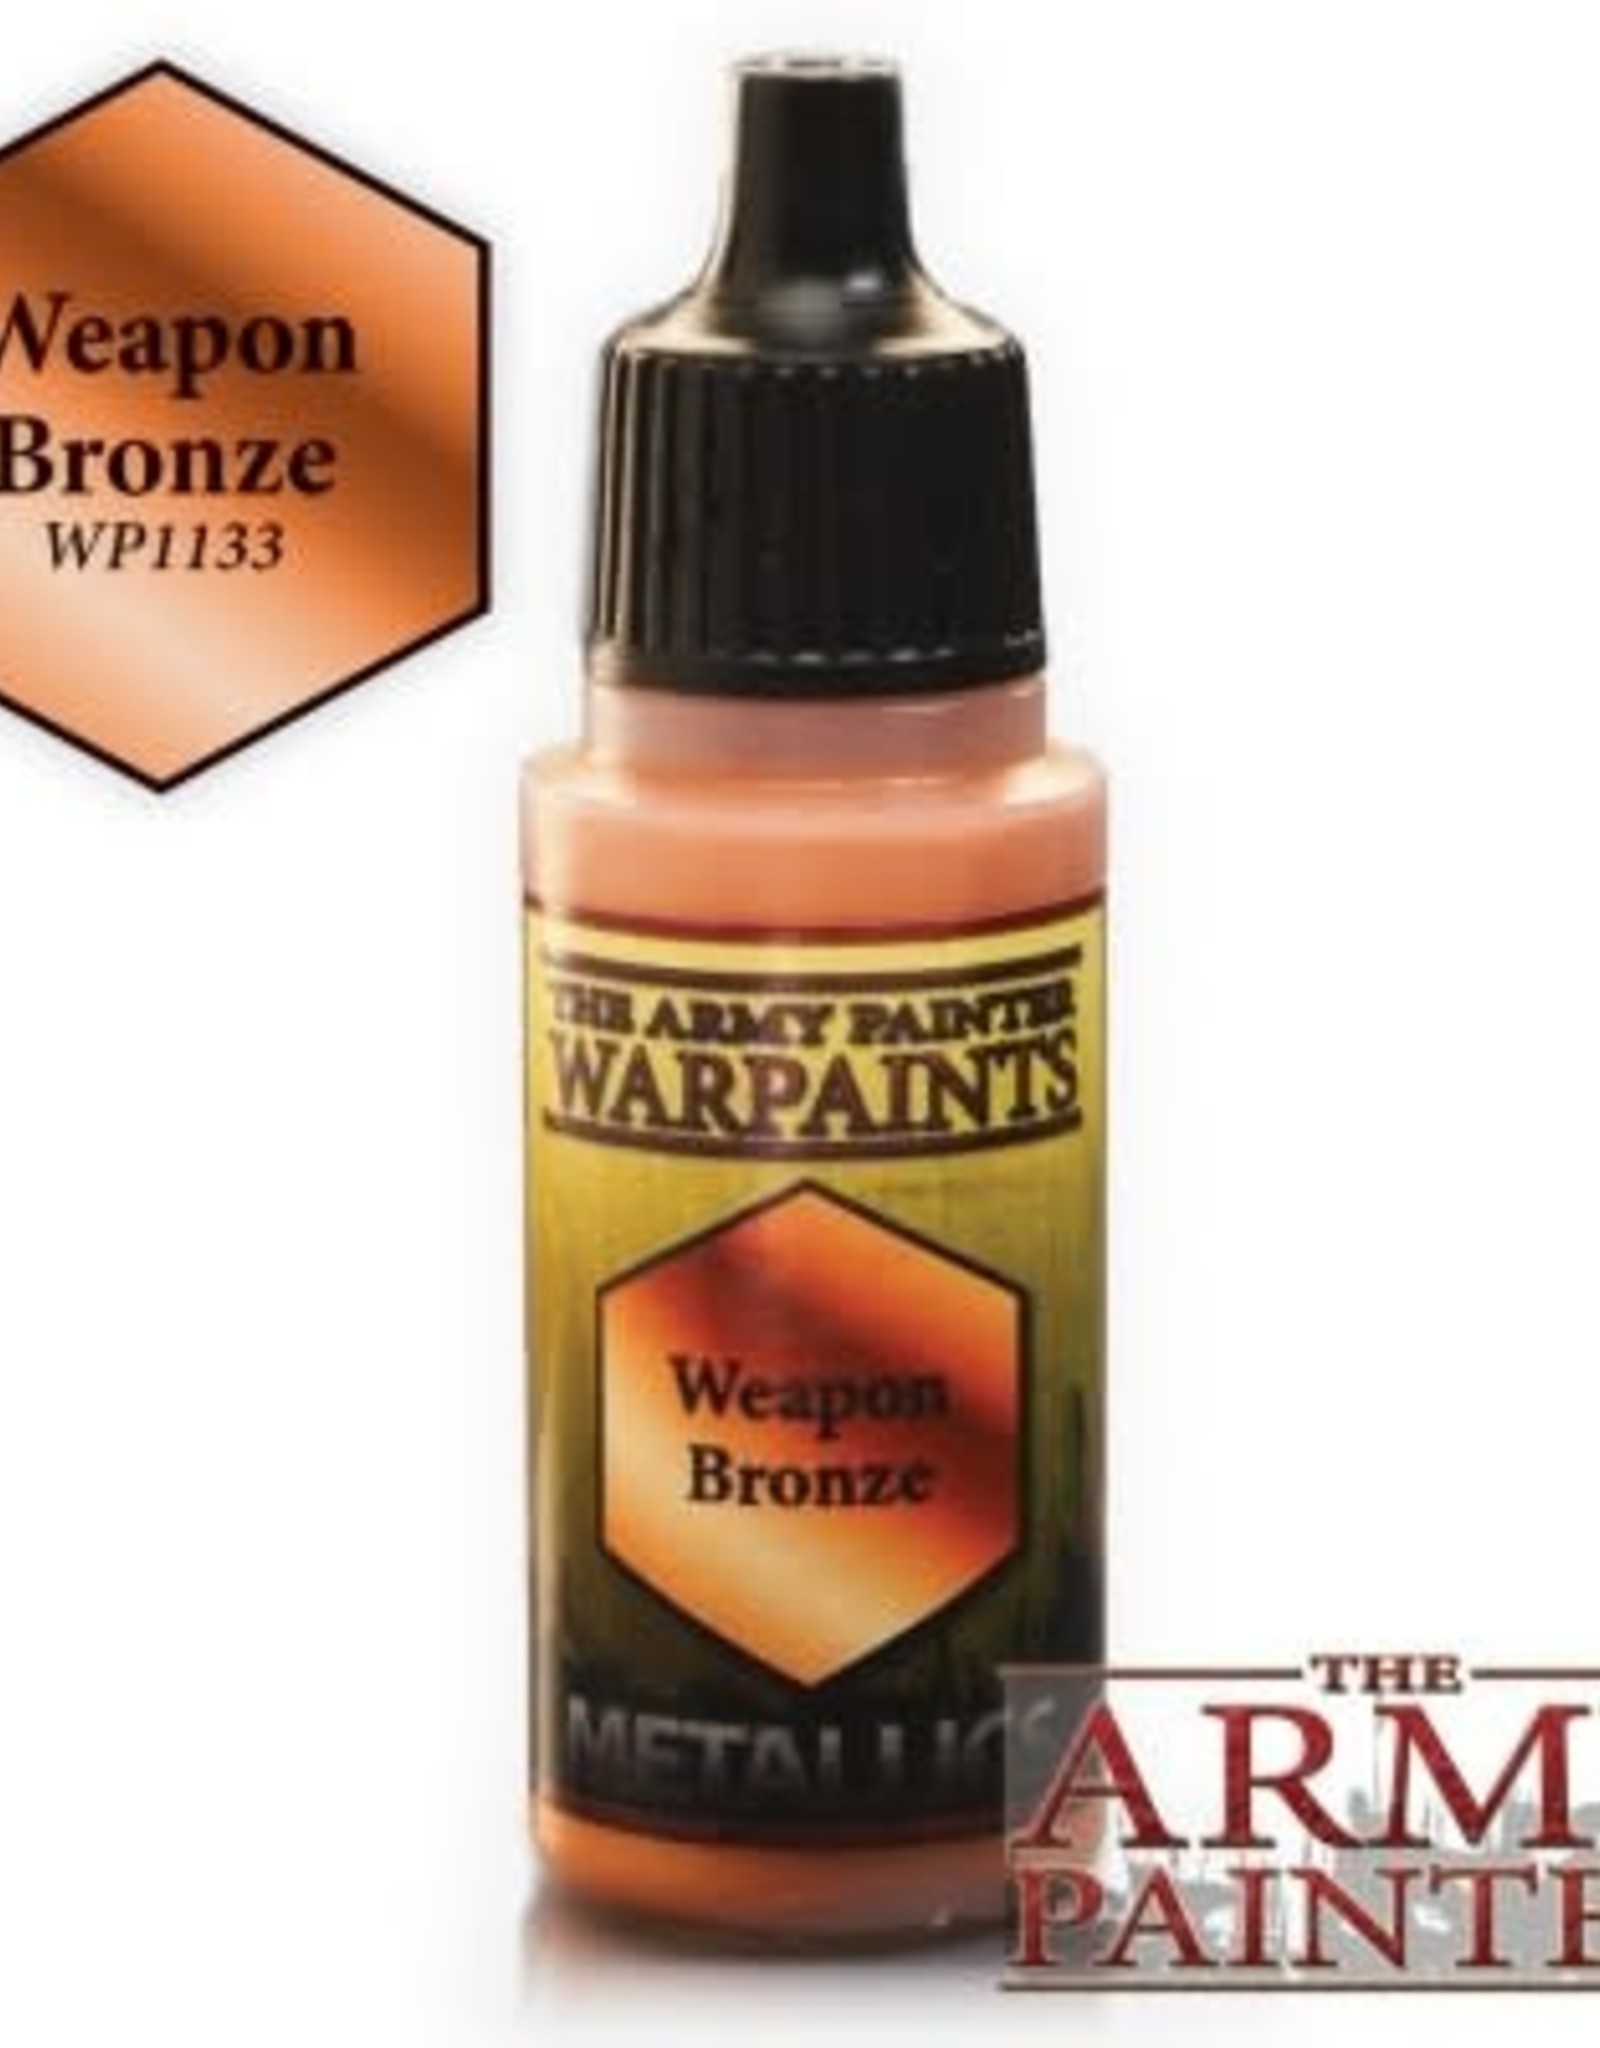 The Army Painter TAP Warpaint Weapon Bronze